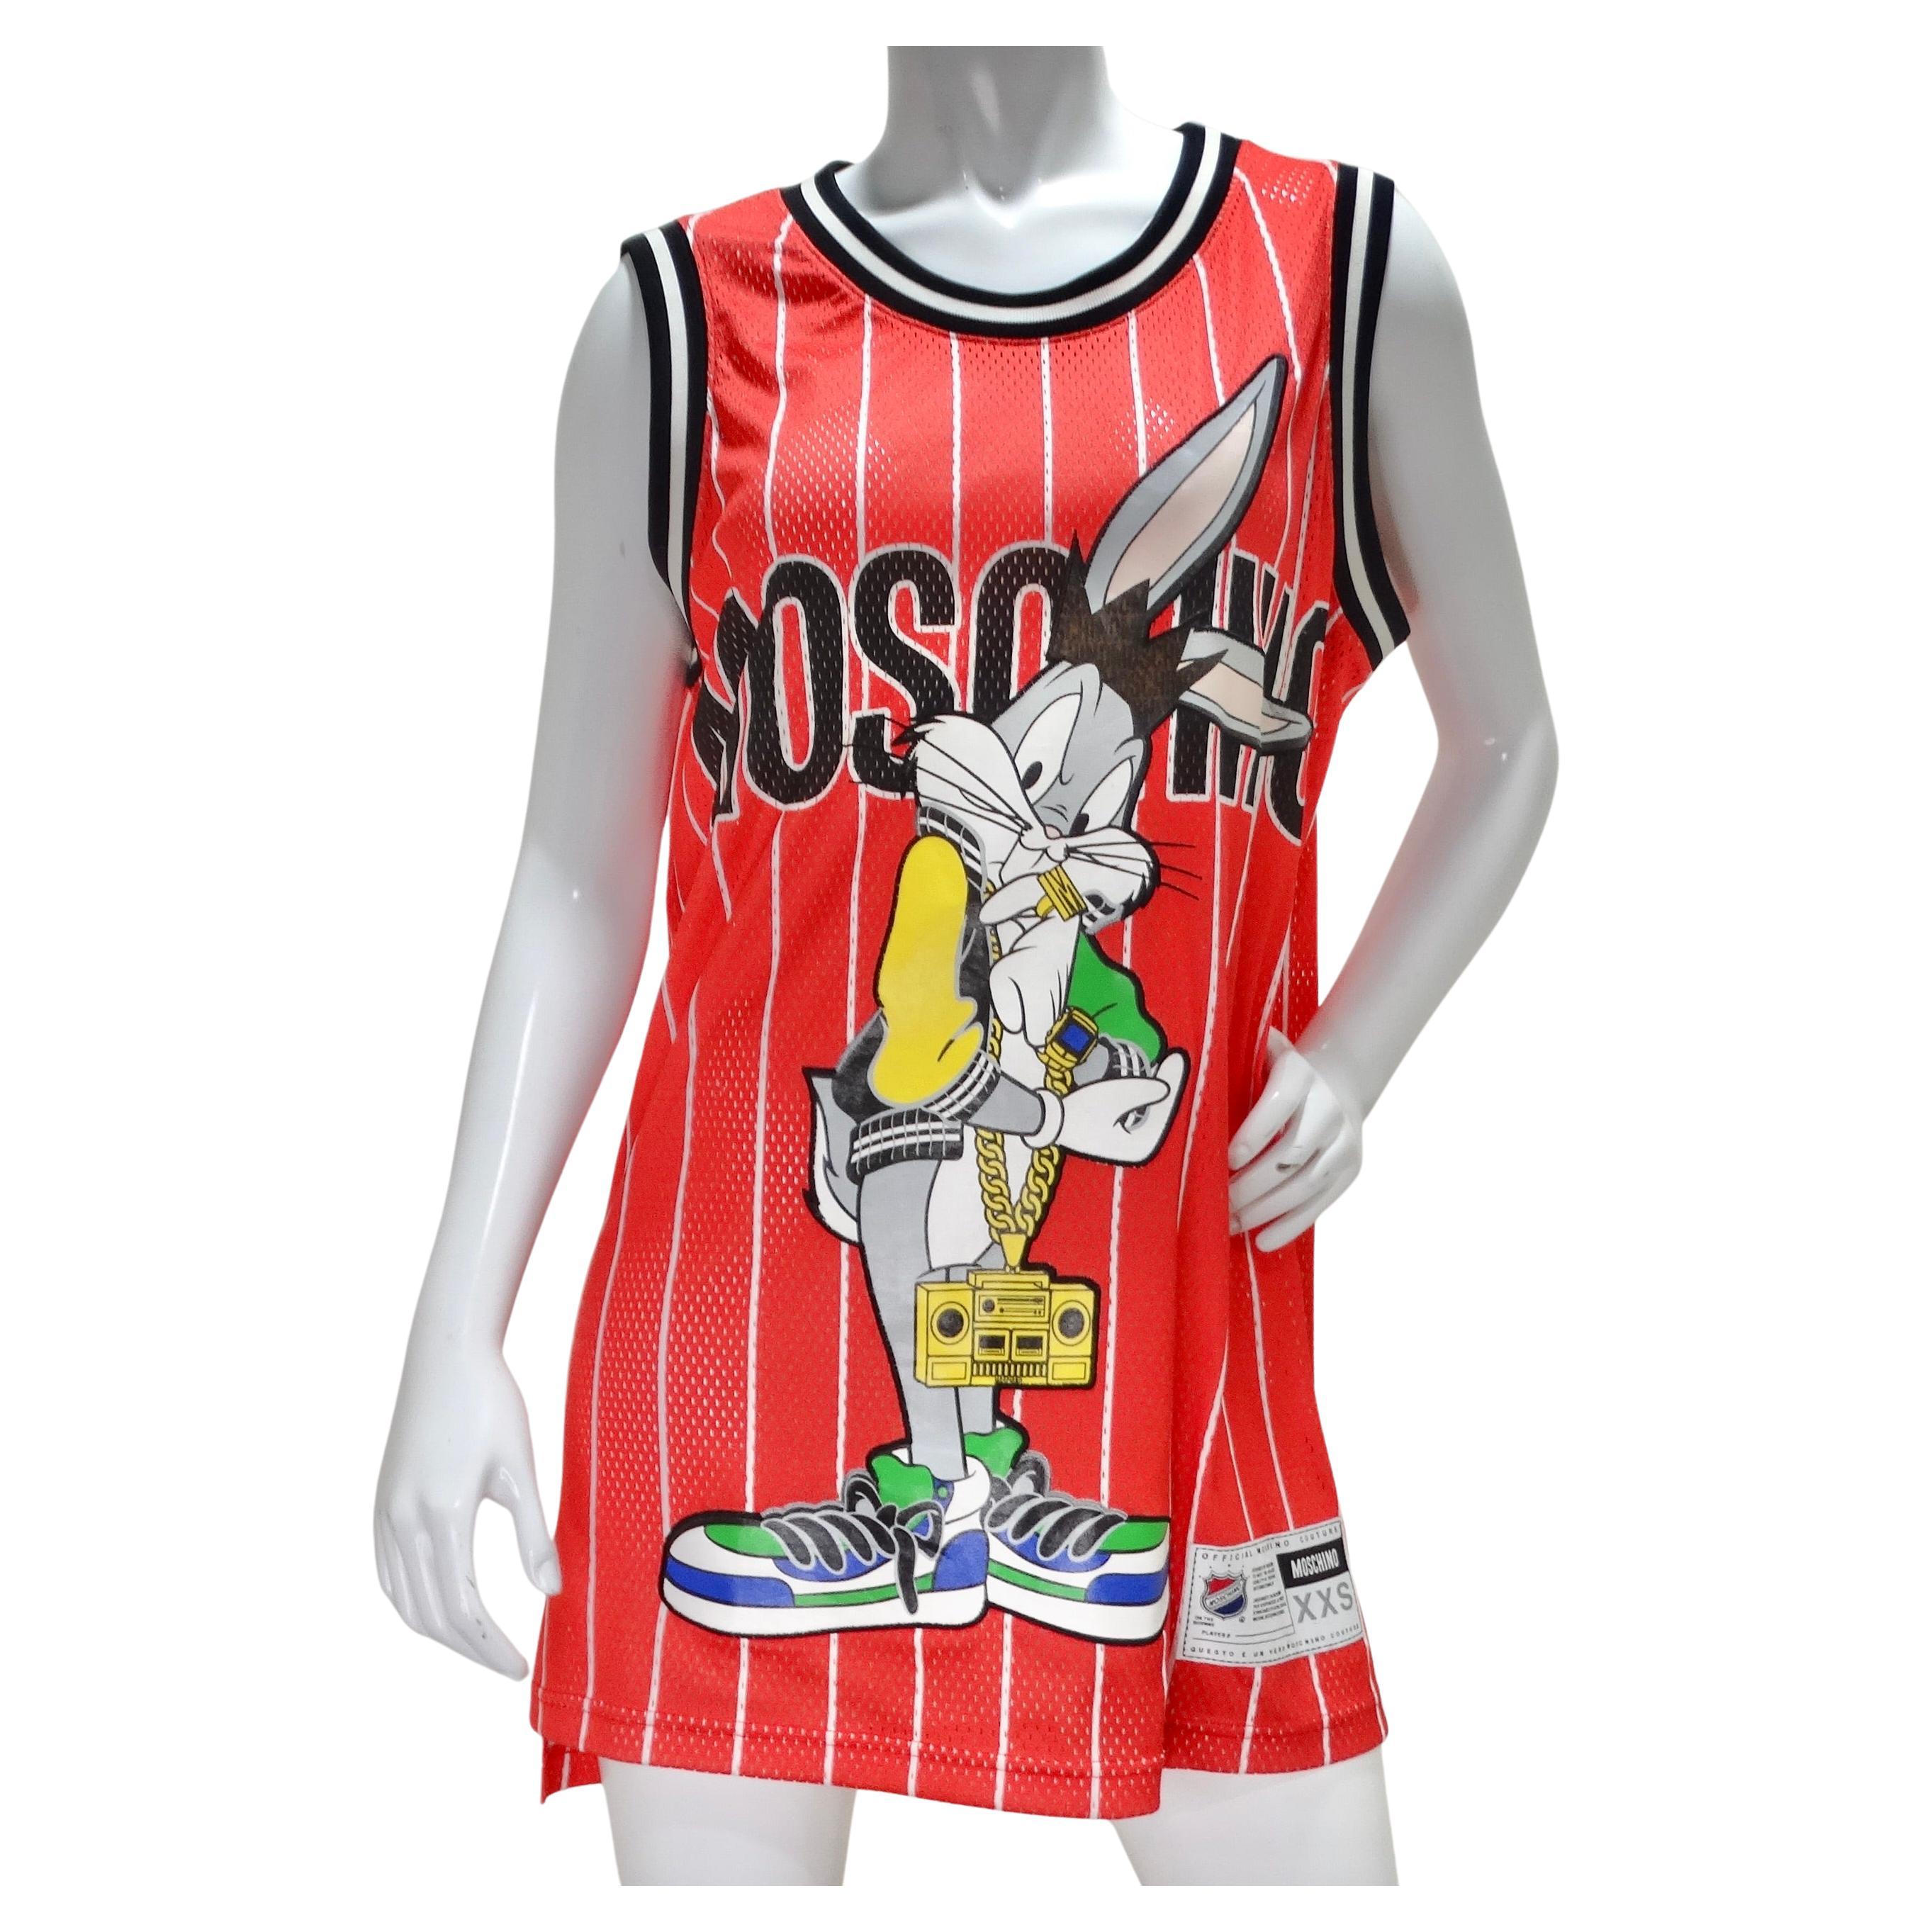 Moschino Couture - Jersey basket-ball « Bugs Bunny » 